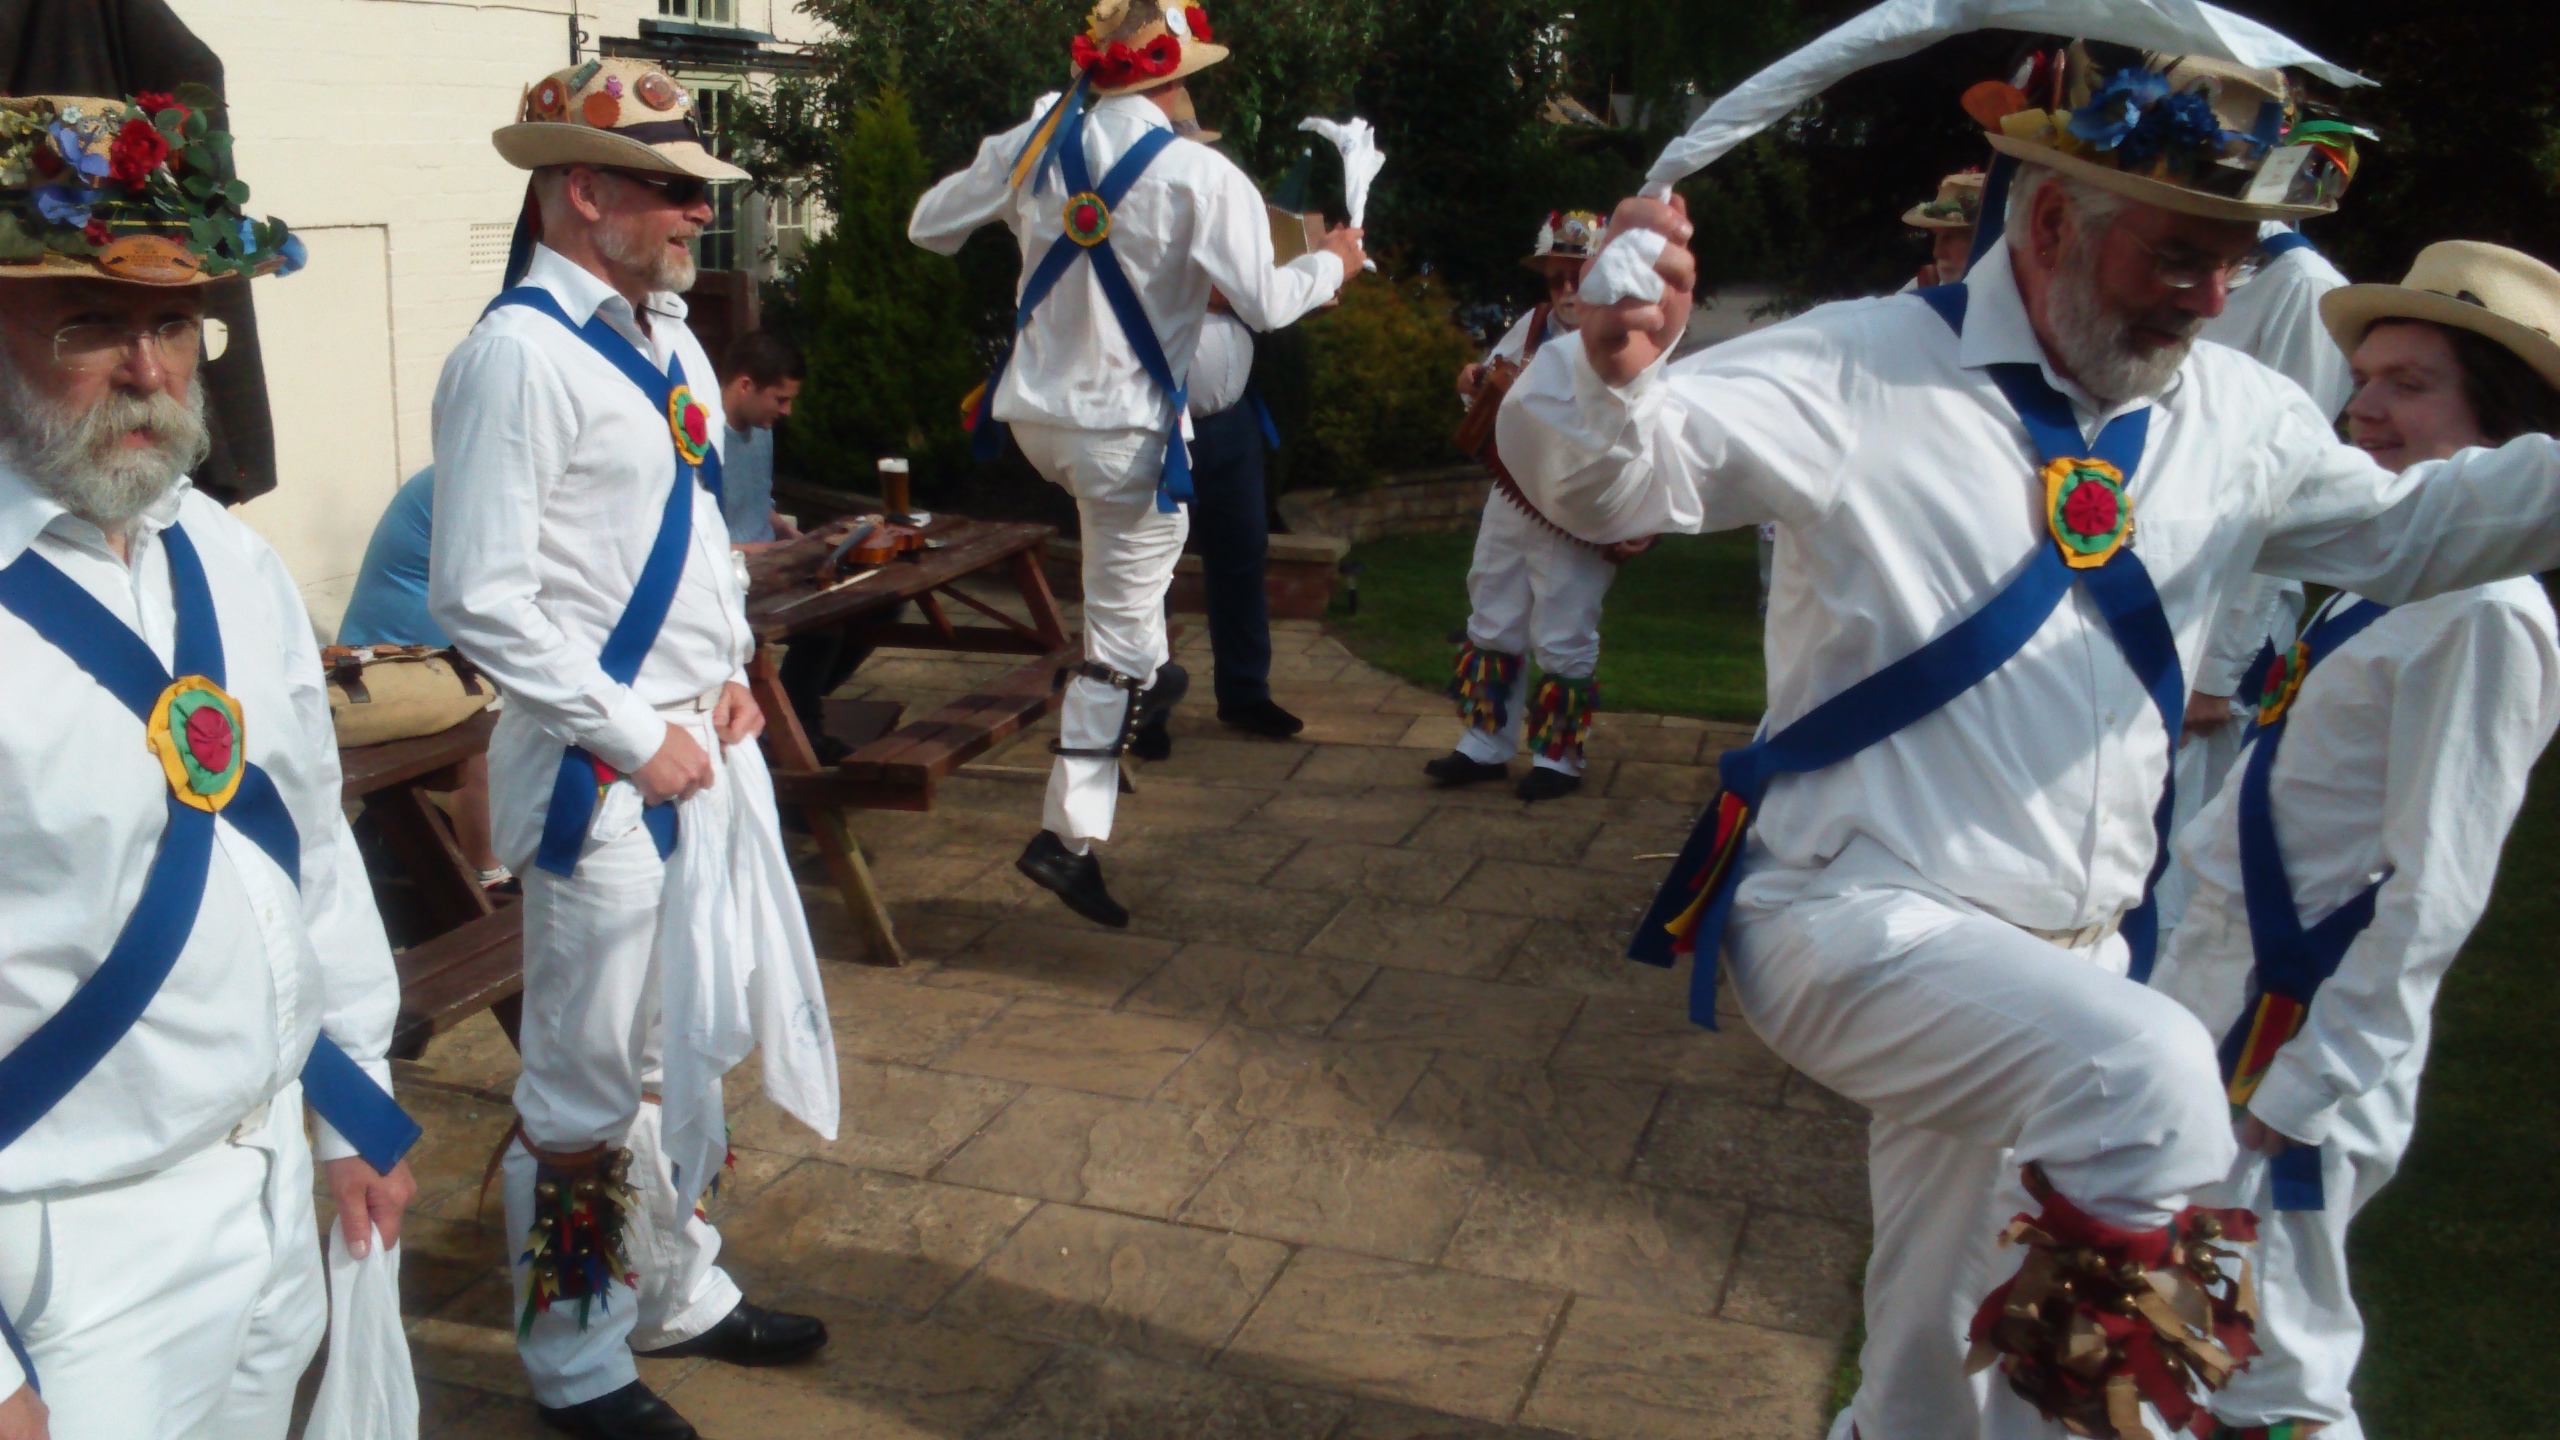 Capering in a dance at The Mary Arden in Wilmcote